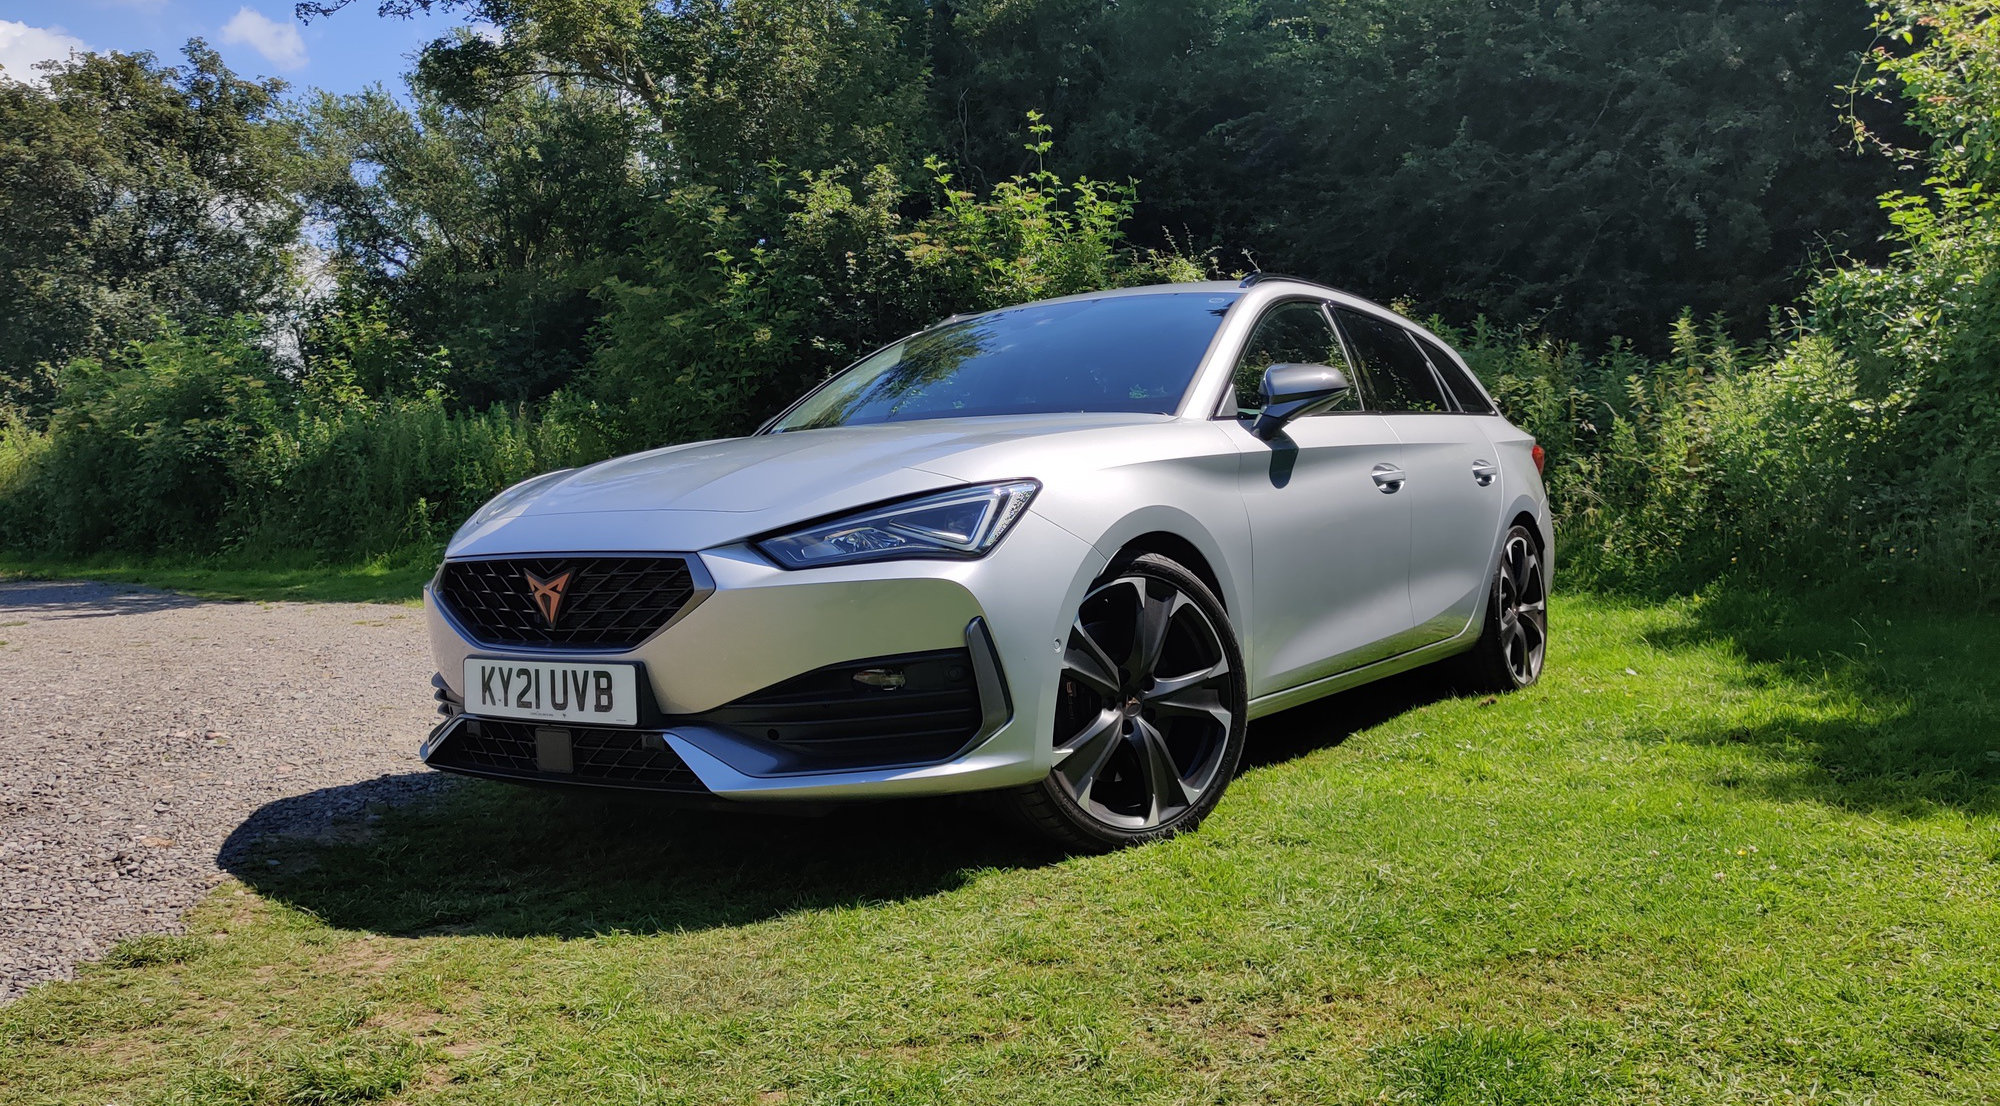 Cupra Leon review: Pretty damn good. If only more people knew about them